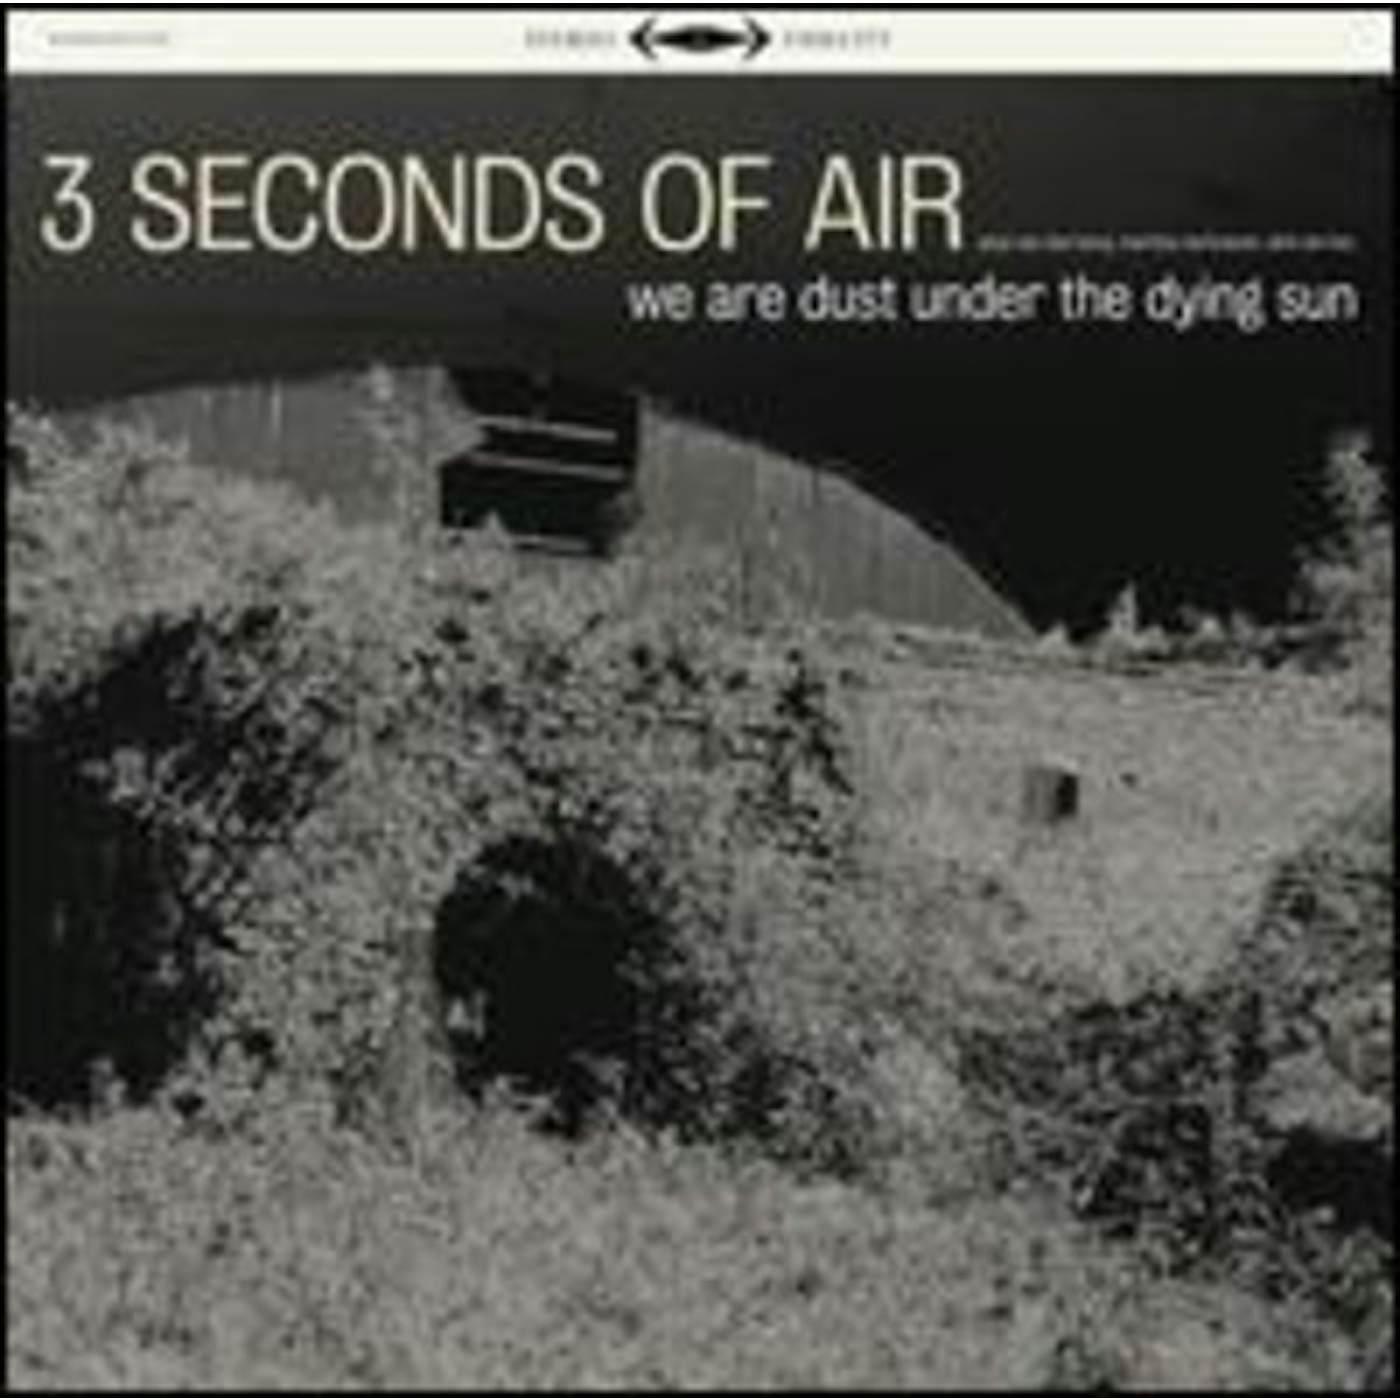 Three Seconds Of Air WE ARE DUST UNDER THE DYING SUN (180G/LP/CD) Vinyl Record